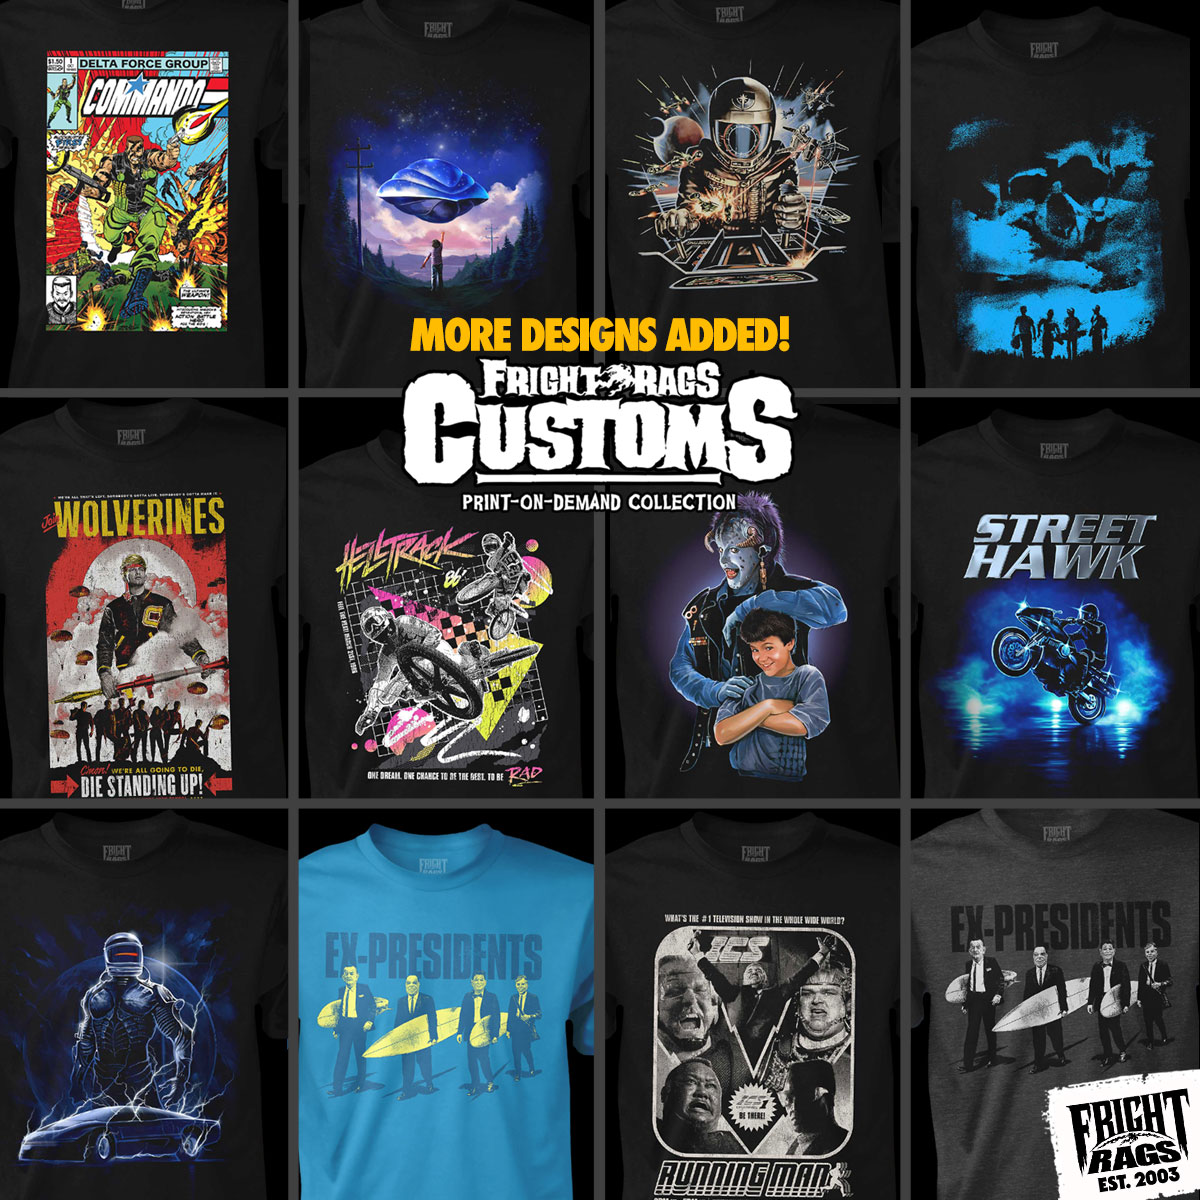 NOW AVAILABLE! 🚨 We just expanded our print-on-demand Fright-Rags Customs collection with a handful of classic non-horror designs. The Wraith, Commando, Little Monsters, The Running Man & MORE! Only at Fright-Rags 👉 SHOP: bit.ly/44HoqEs